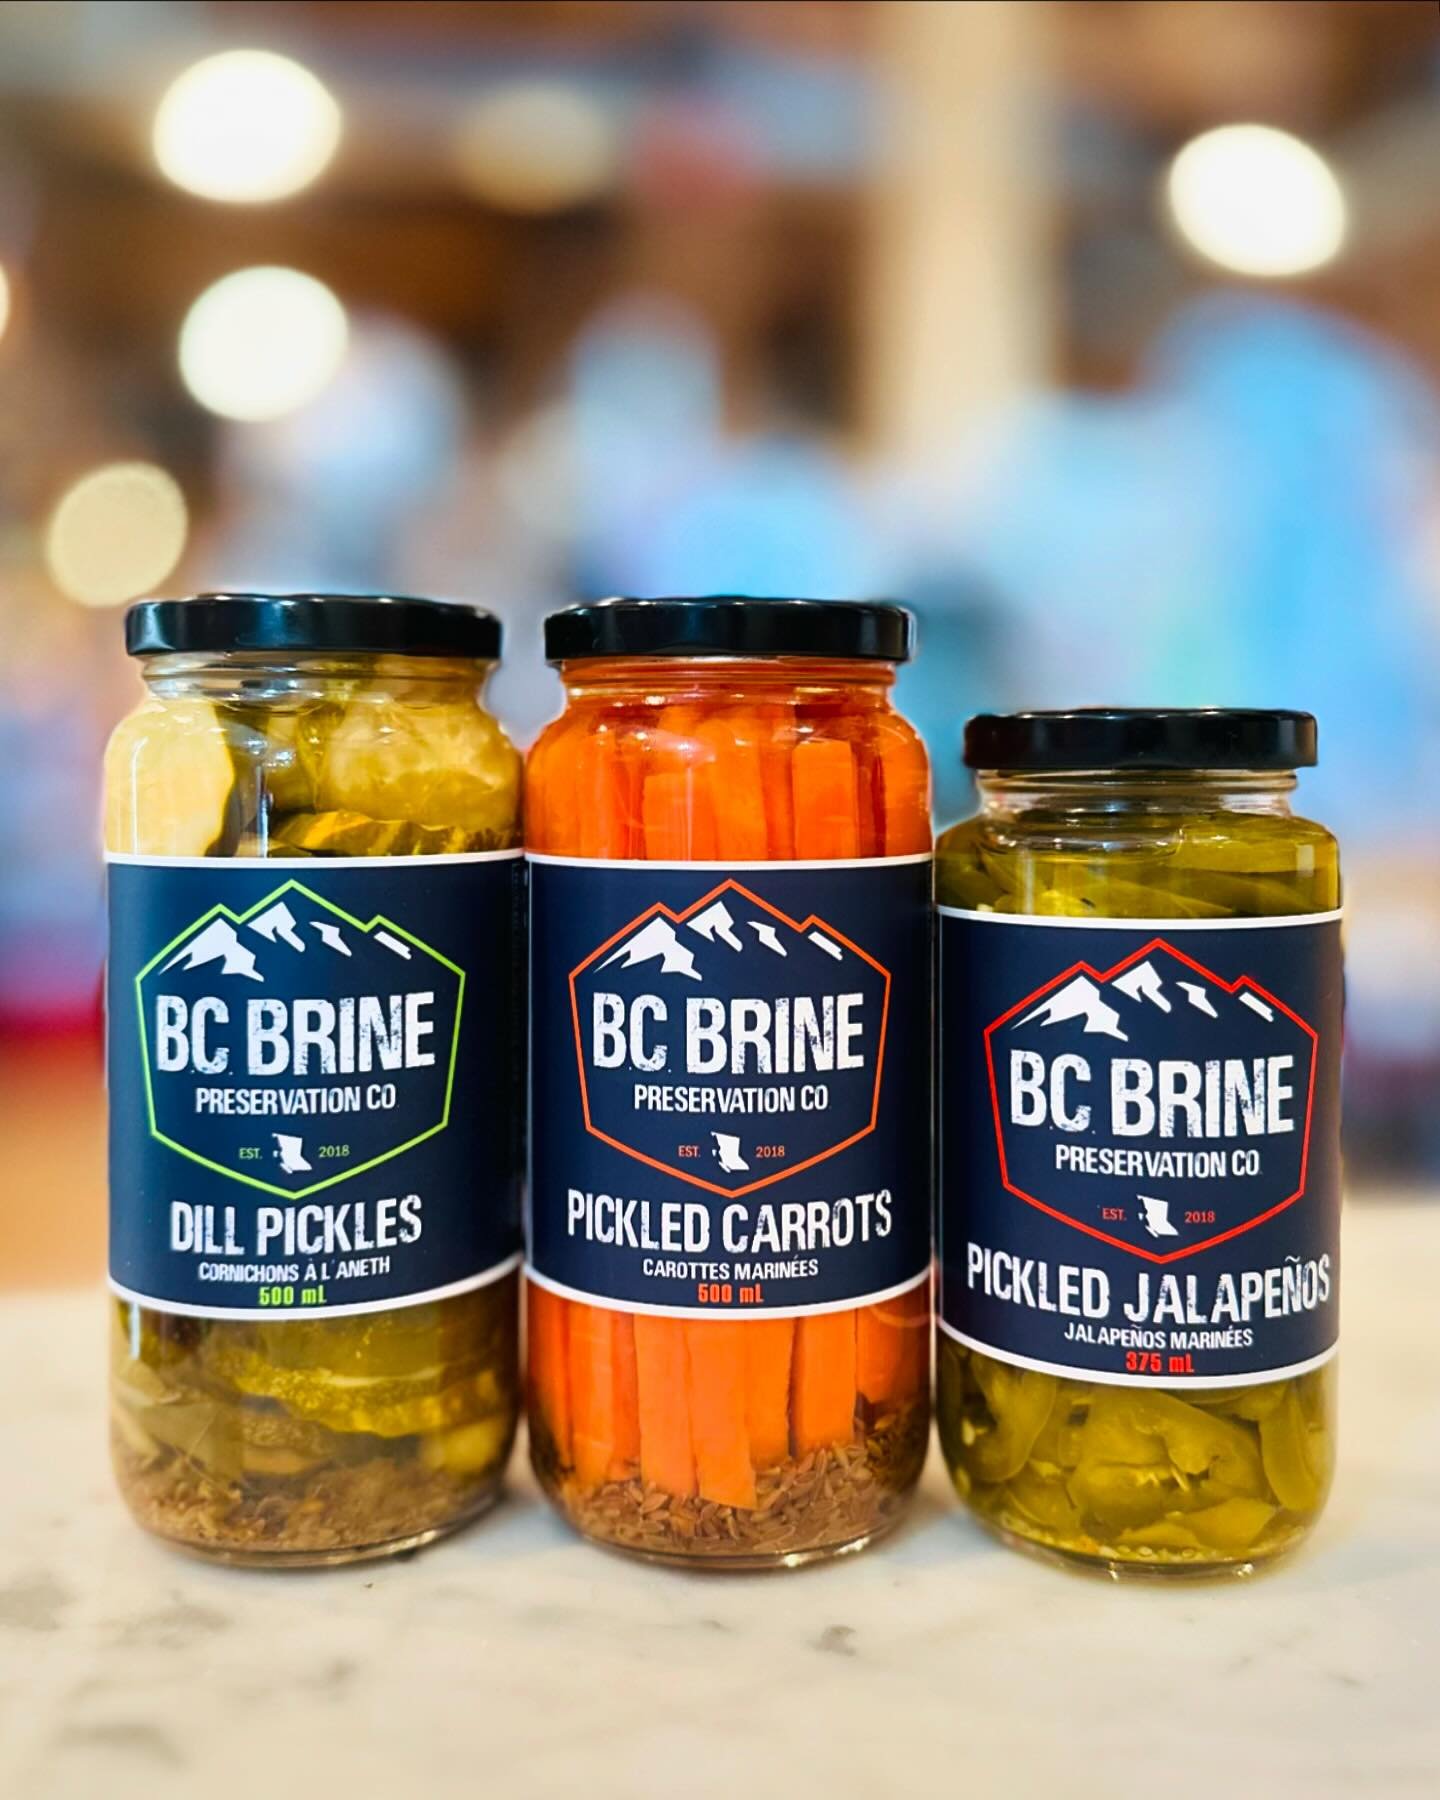 ✨What are you cooking over the long weekend? If it includes burgers, hot dogs, sandwiches, or snacks, you&rsquo;ll need pickles!

BC Brine craft pickles are made in Falkland, British Columbia, and are tasty additions to your summer table. We have Cla